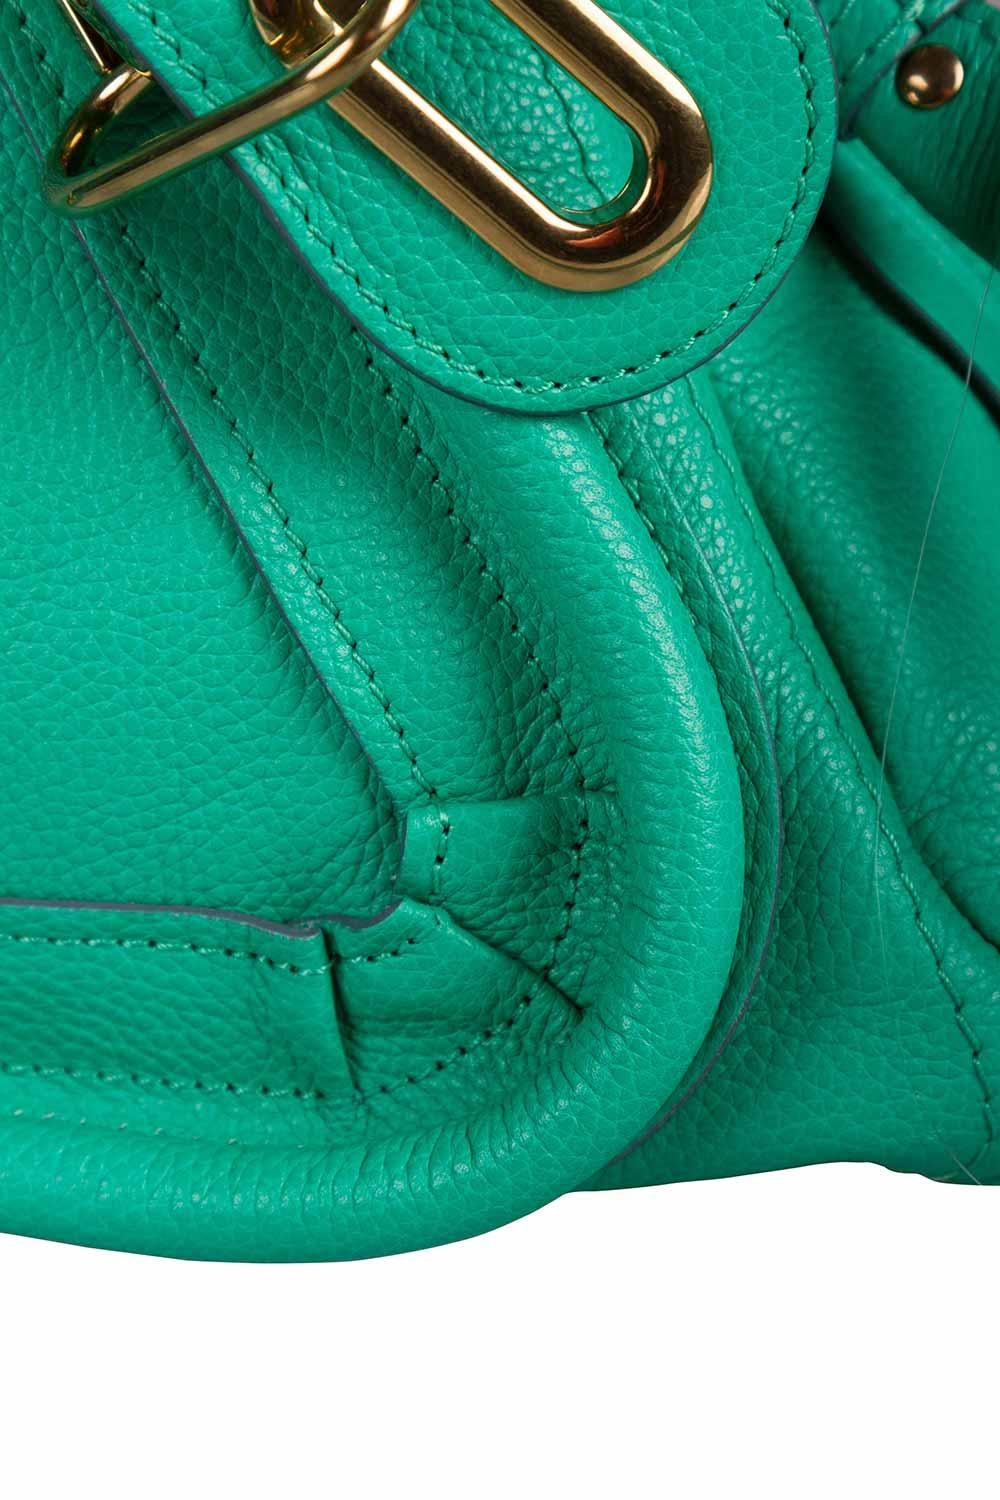 Chloe Coral Green Leather Small Paraty Shoulder Bag 3